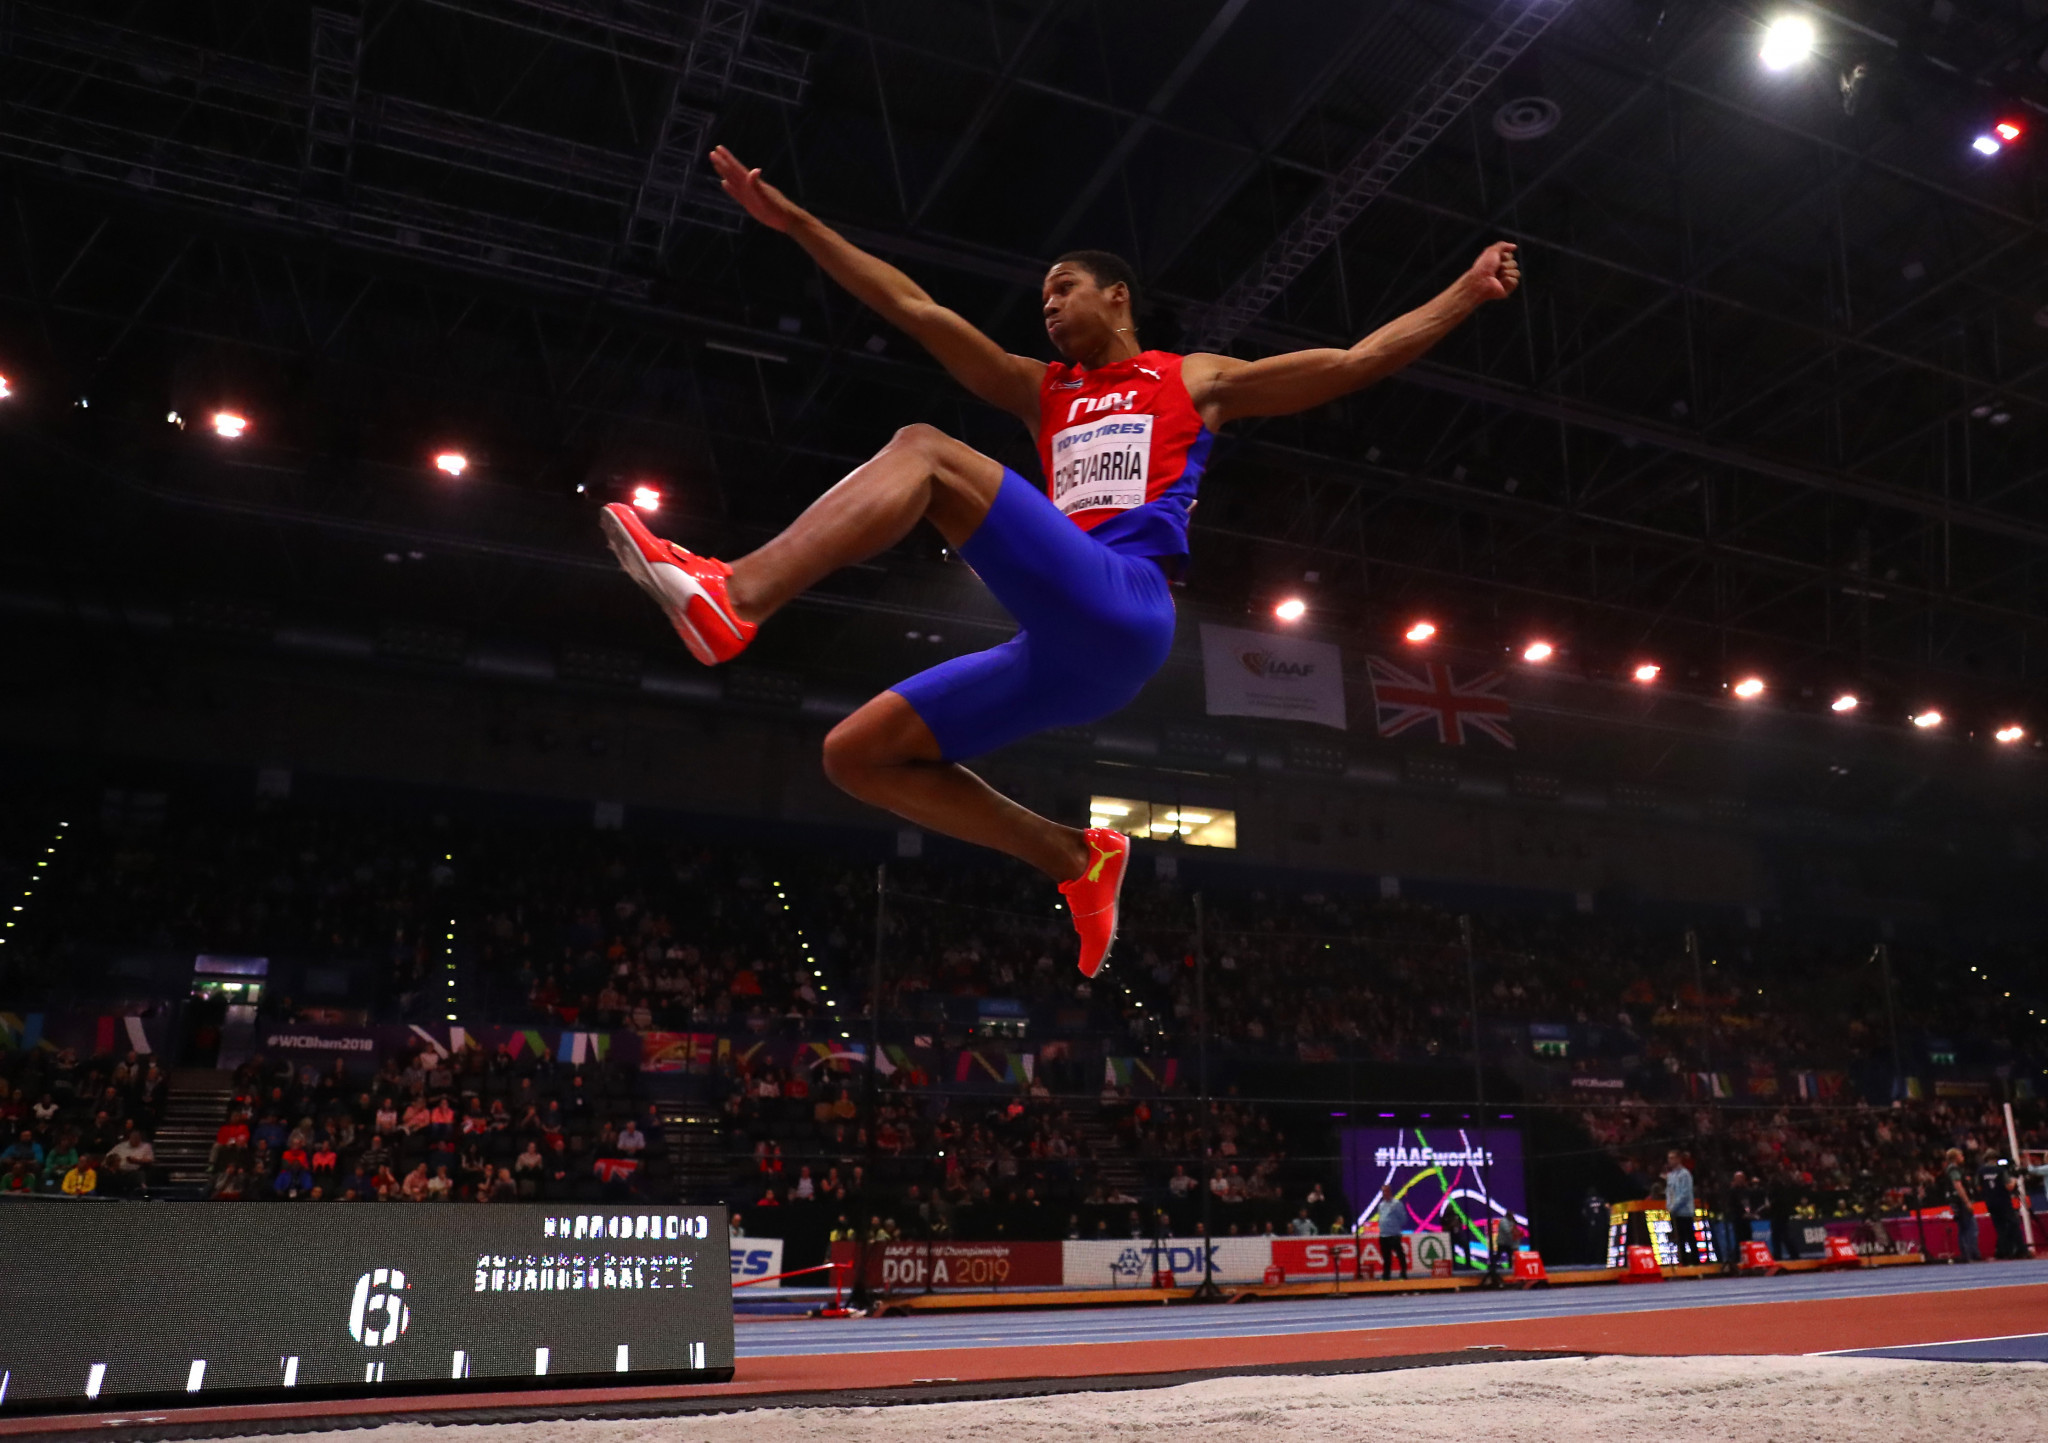 Echevarria loses men's long jump on count back at IAAF World Indoor Tour in Karlsruhe